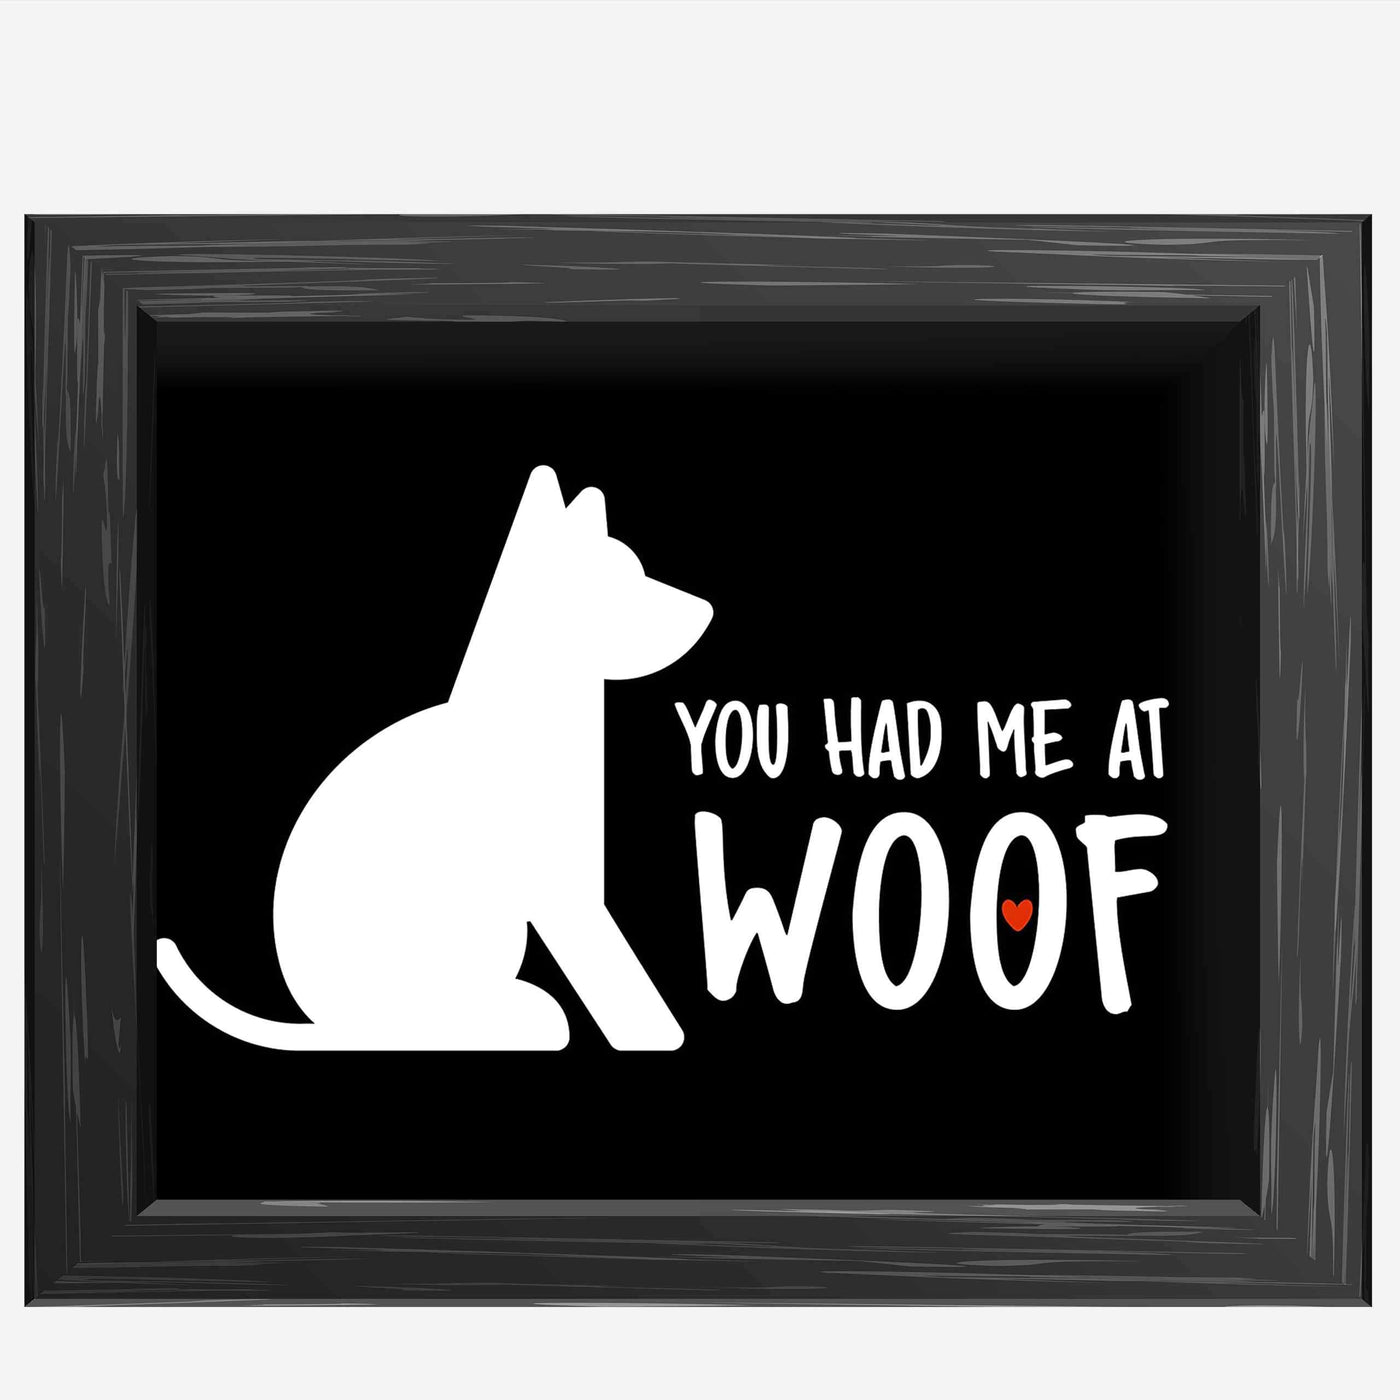 You Had Me At Woof Funny Dog Sign -10 x 8" Wall Art Print-Ready to Frame. Humorous Typographic Art Print for Home-Kitchen-Vet's Office Decor. Great Welcome Sign and Gift for All Dog Lovers!